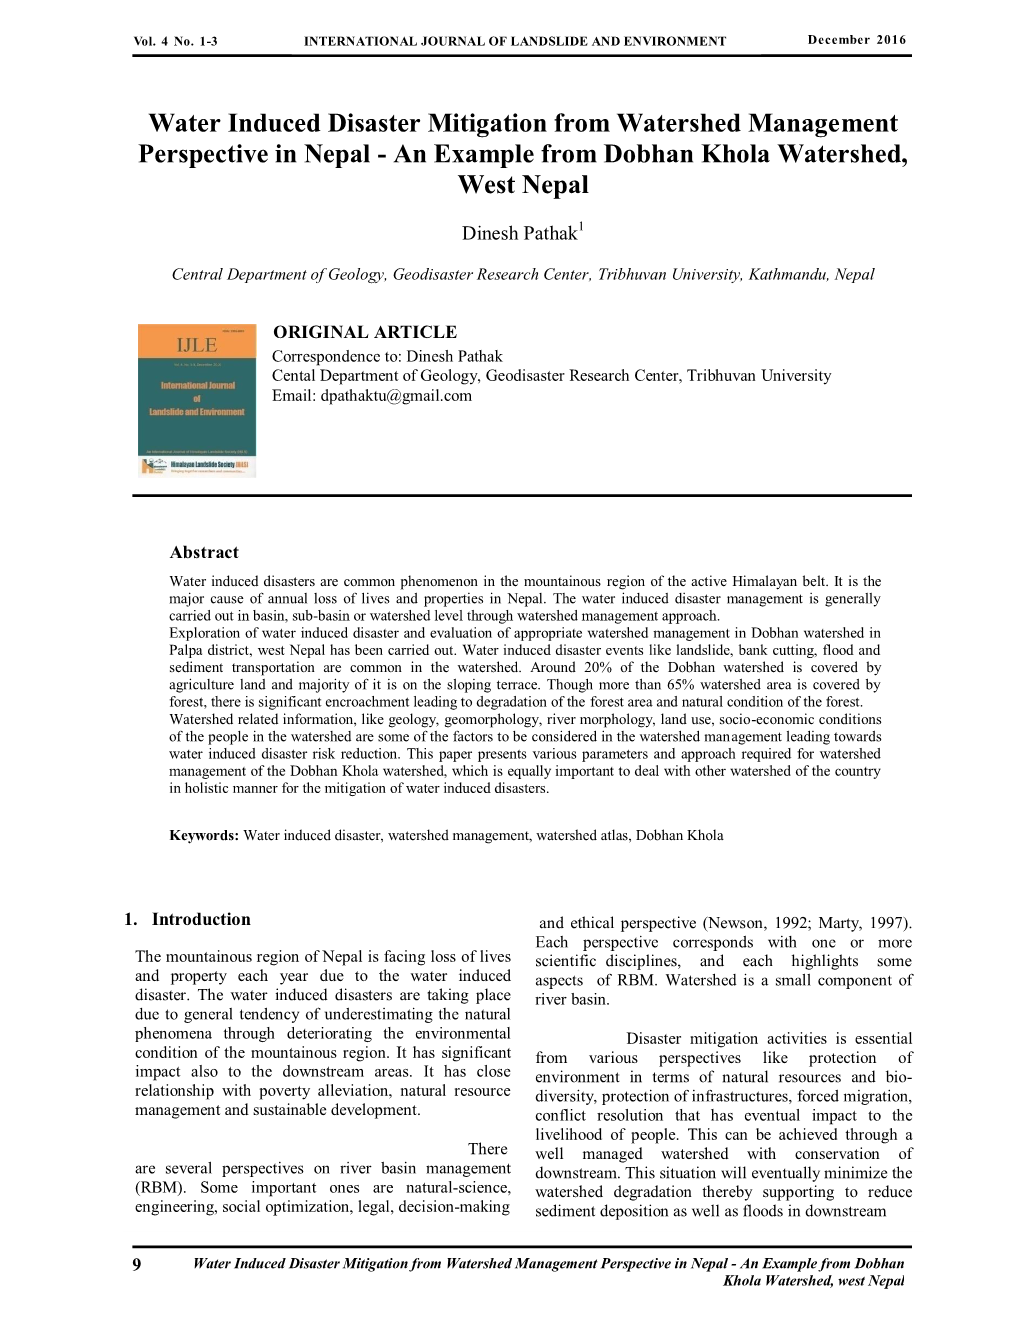 Water Induced Disaster Mitigation from Watershed Management Perspective in Nepal - an Example from Dobhan Khola Watershed, West Nepal